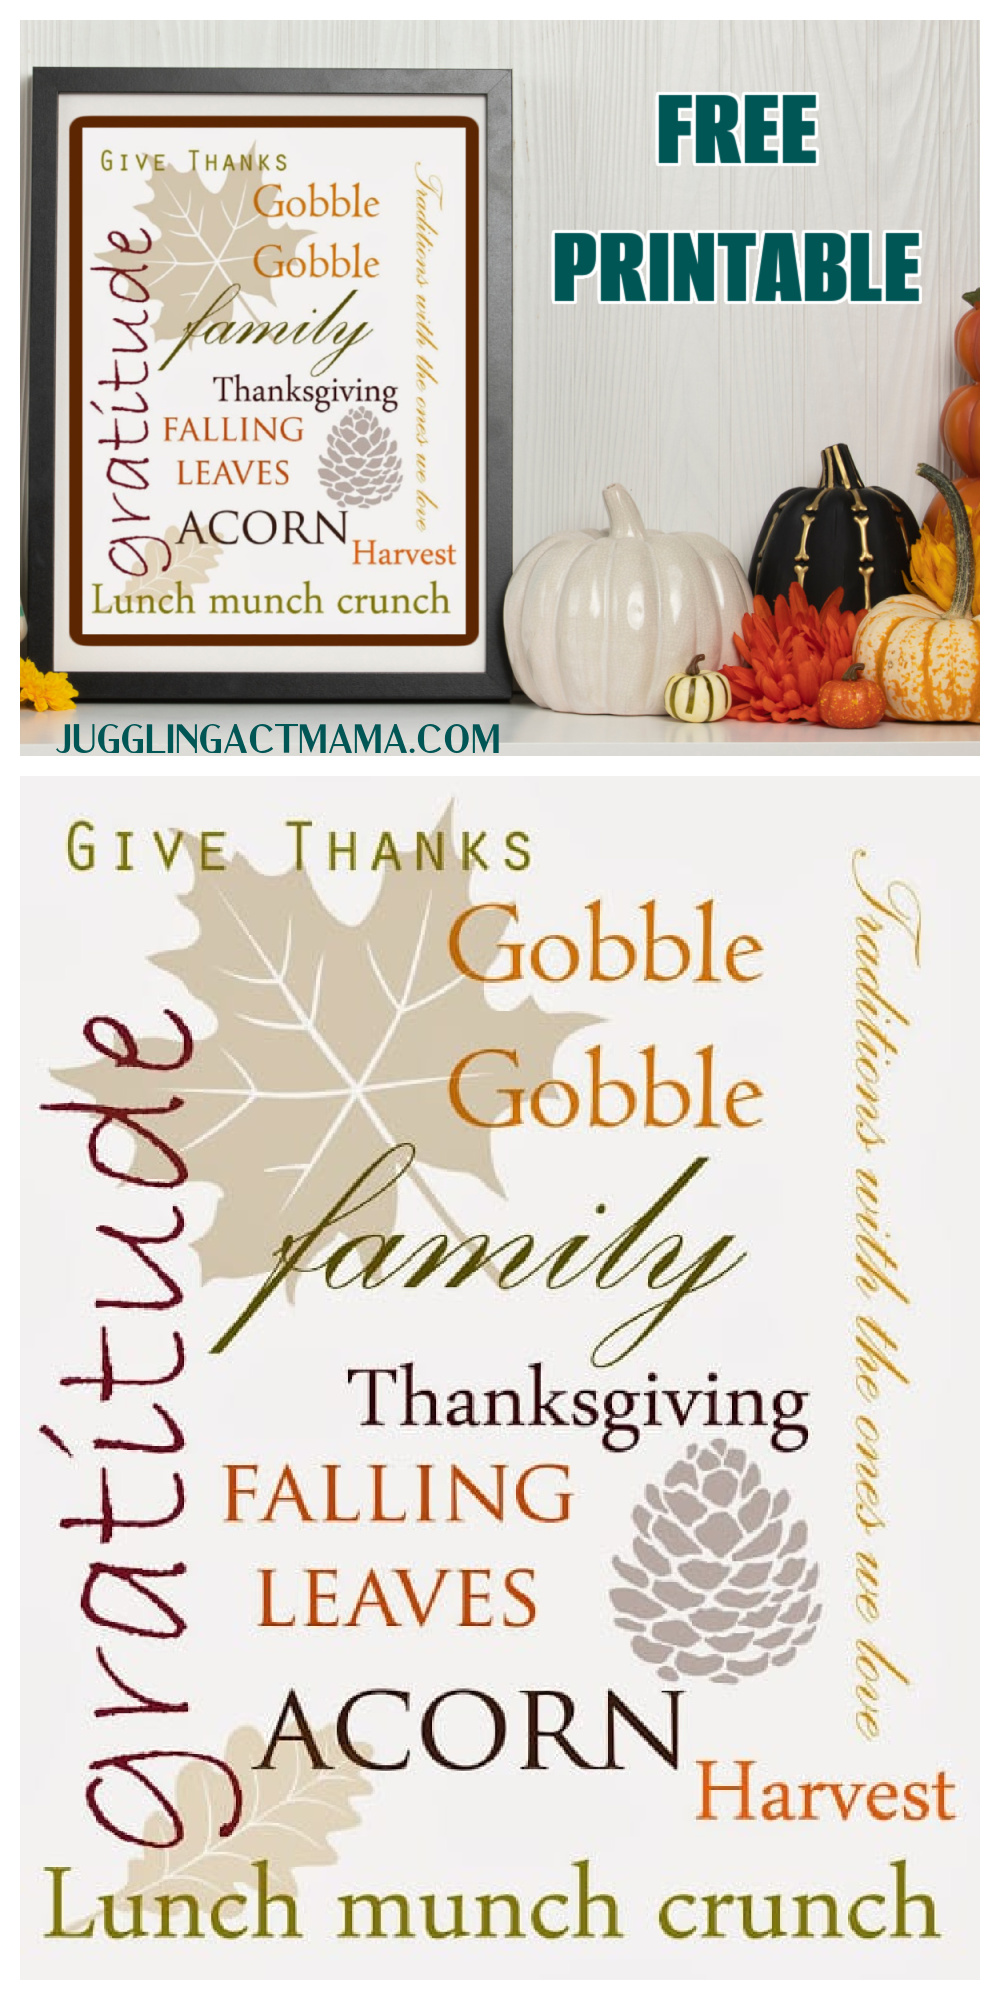 This sweet Thanksgiving printable reminds us to have gratitude and give thanks. It's a cute addition to any fall decor. via @jugglingactmama